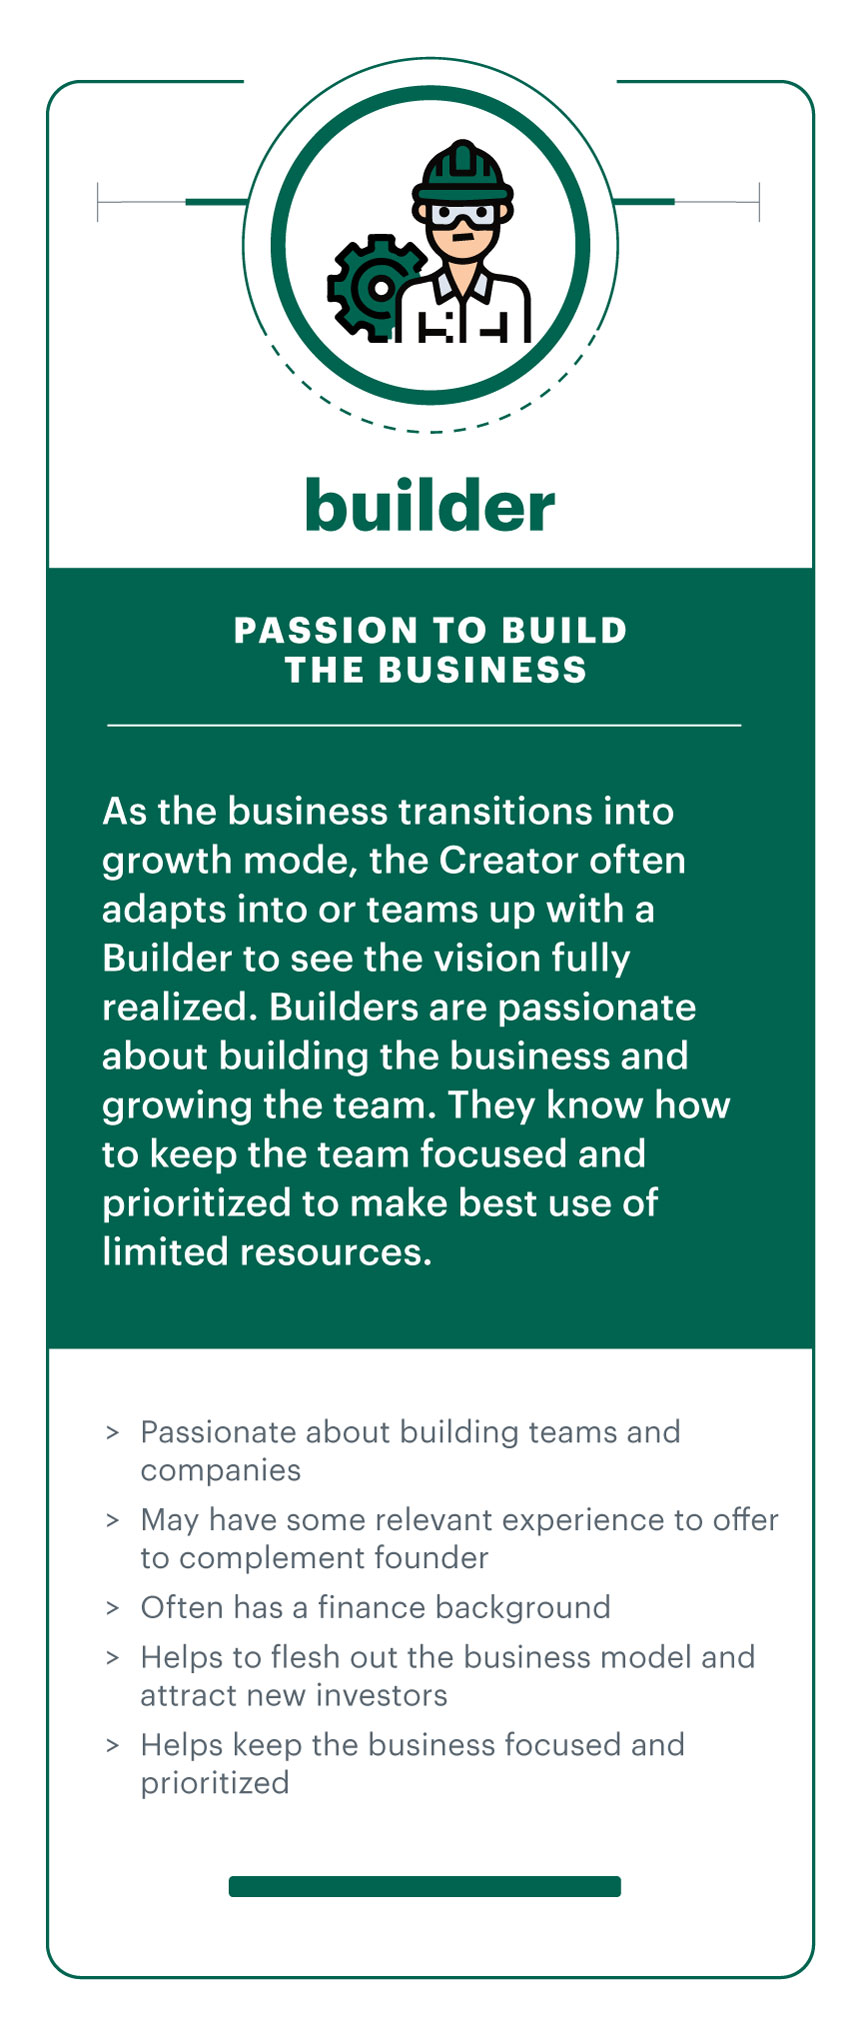 informational graphic explaining the persona of the builder